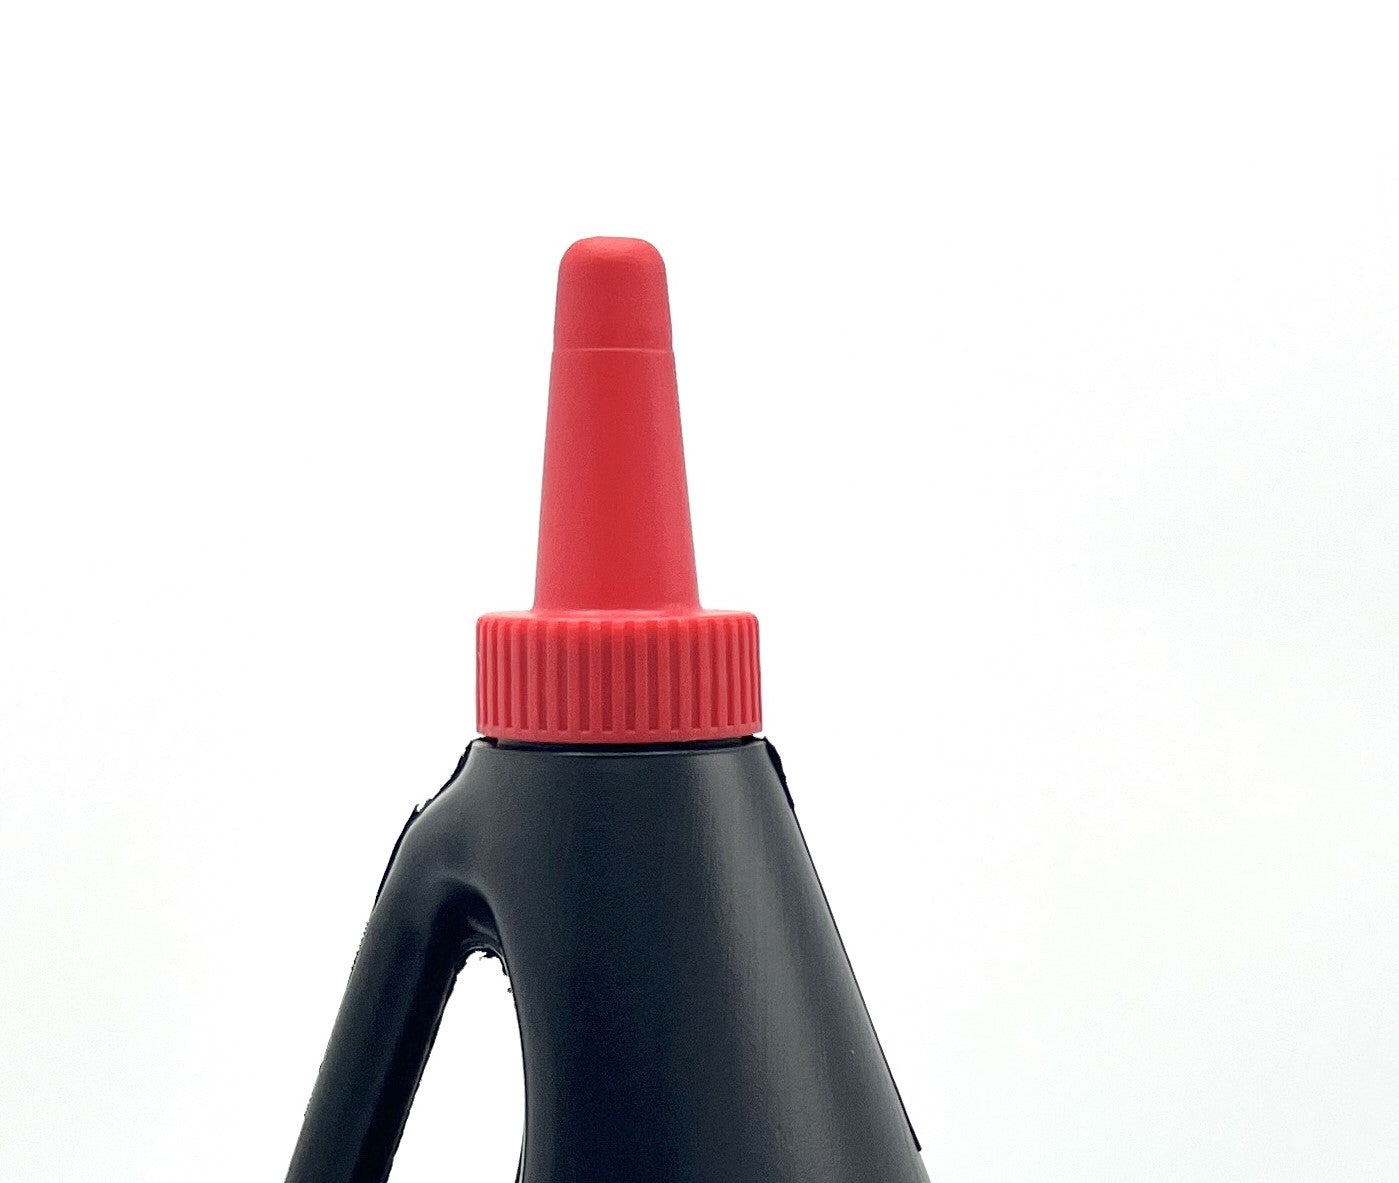 32oz Black HDPE Industrial Round Grab-N-Go Jug with Red No Hole Spout Cap